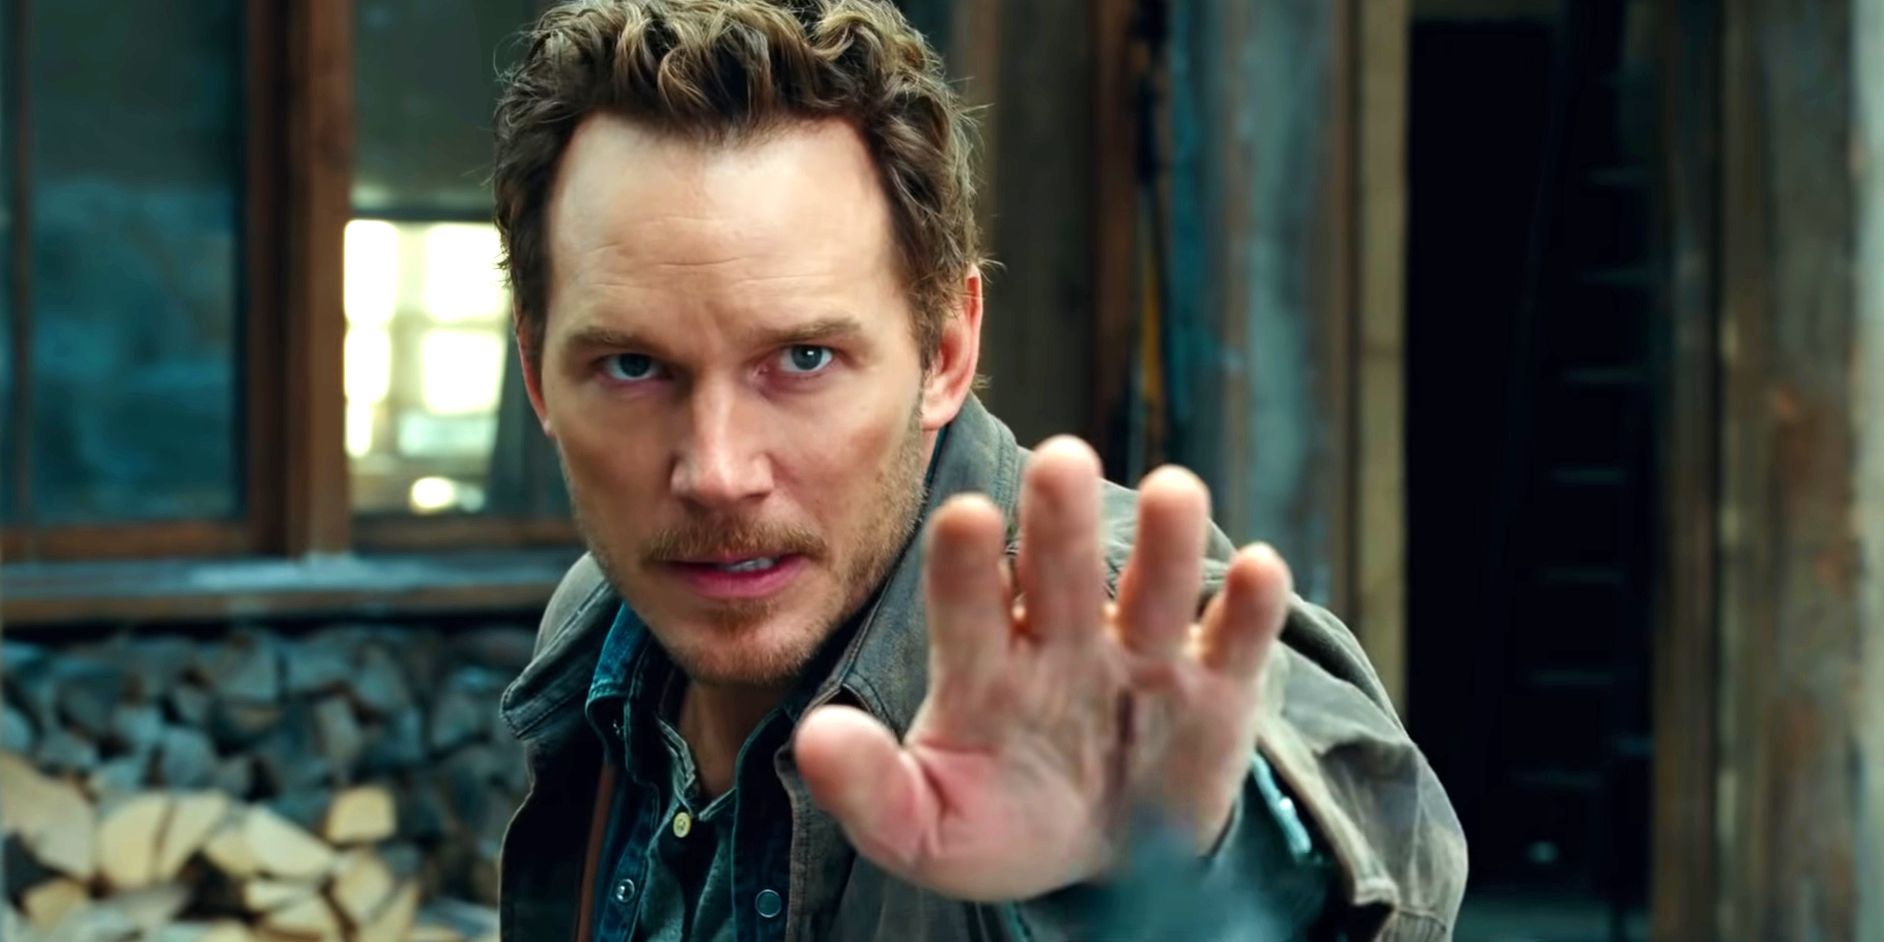 Jurassic World 4: Release Date & Everything We Know About The Next